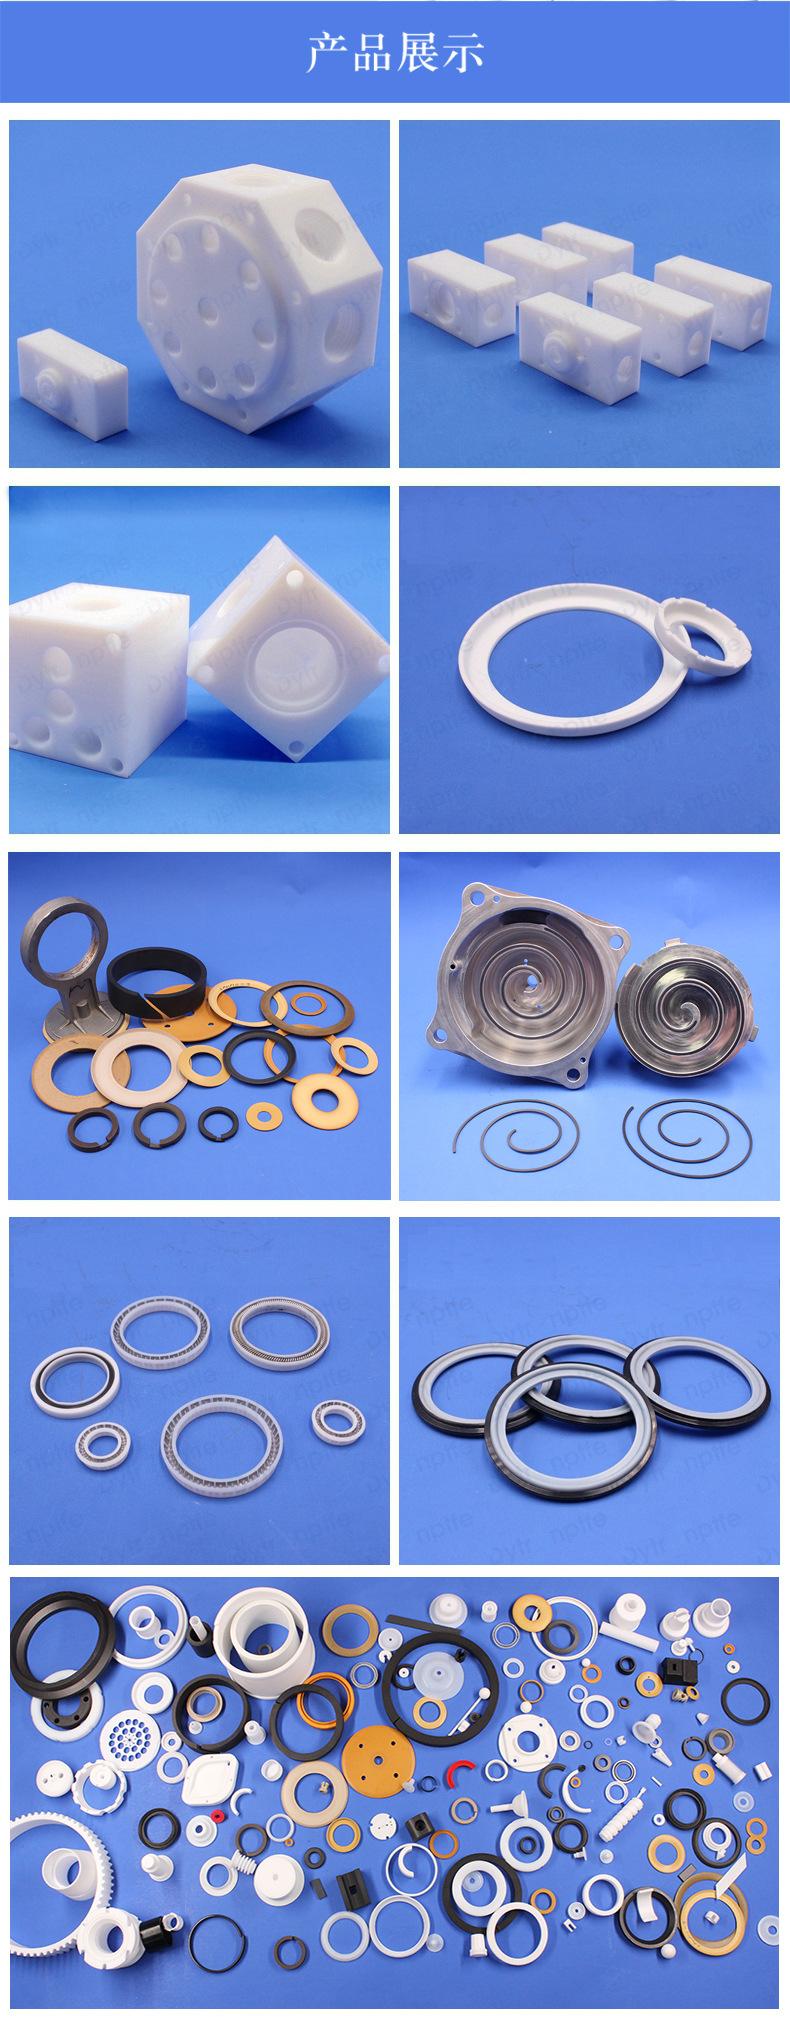 Dechuang Processing PTFE Mechanical Seals for Water Pump Seals PTFE Shaped Parts